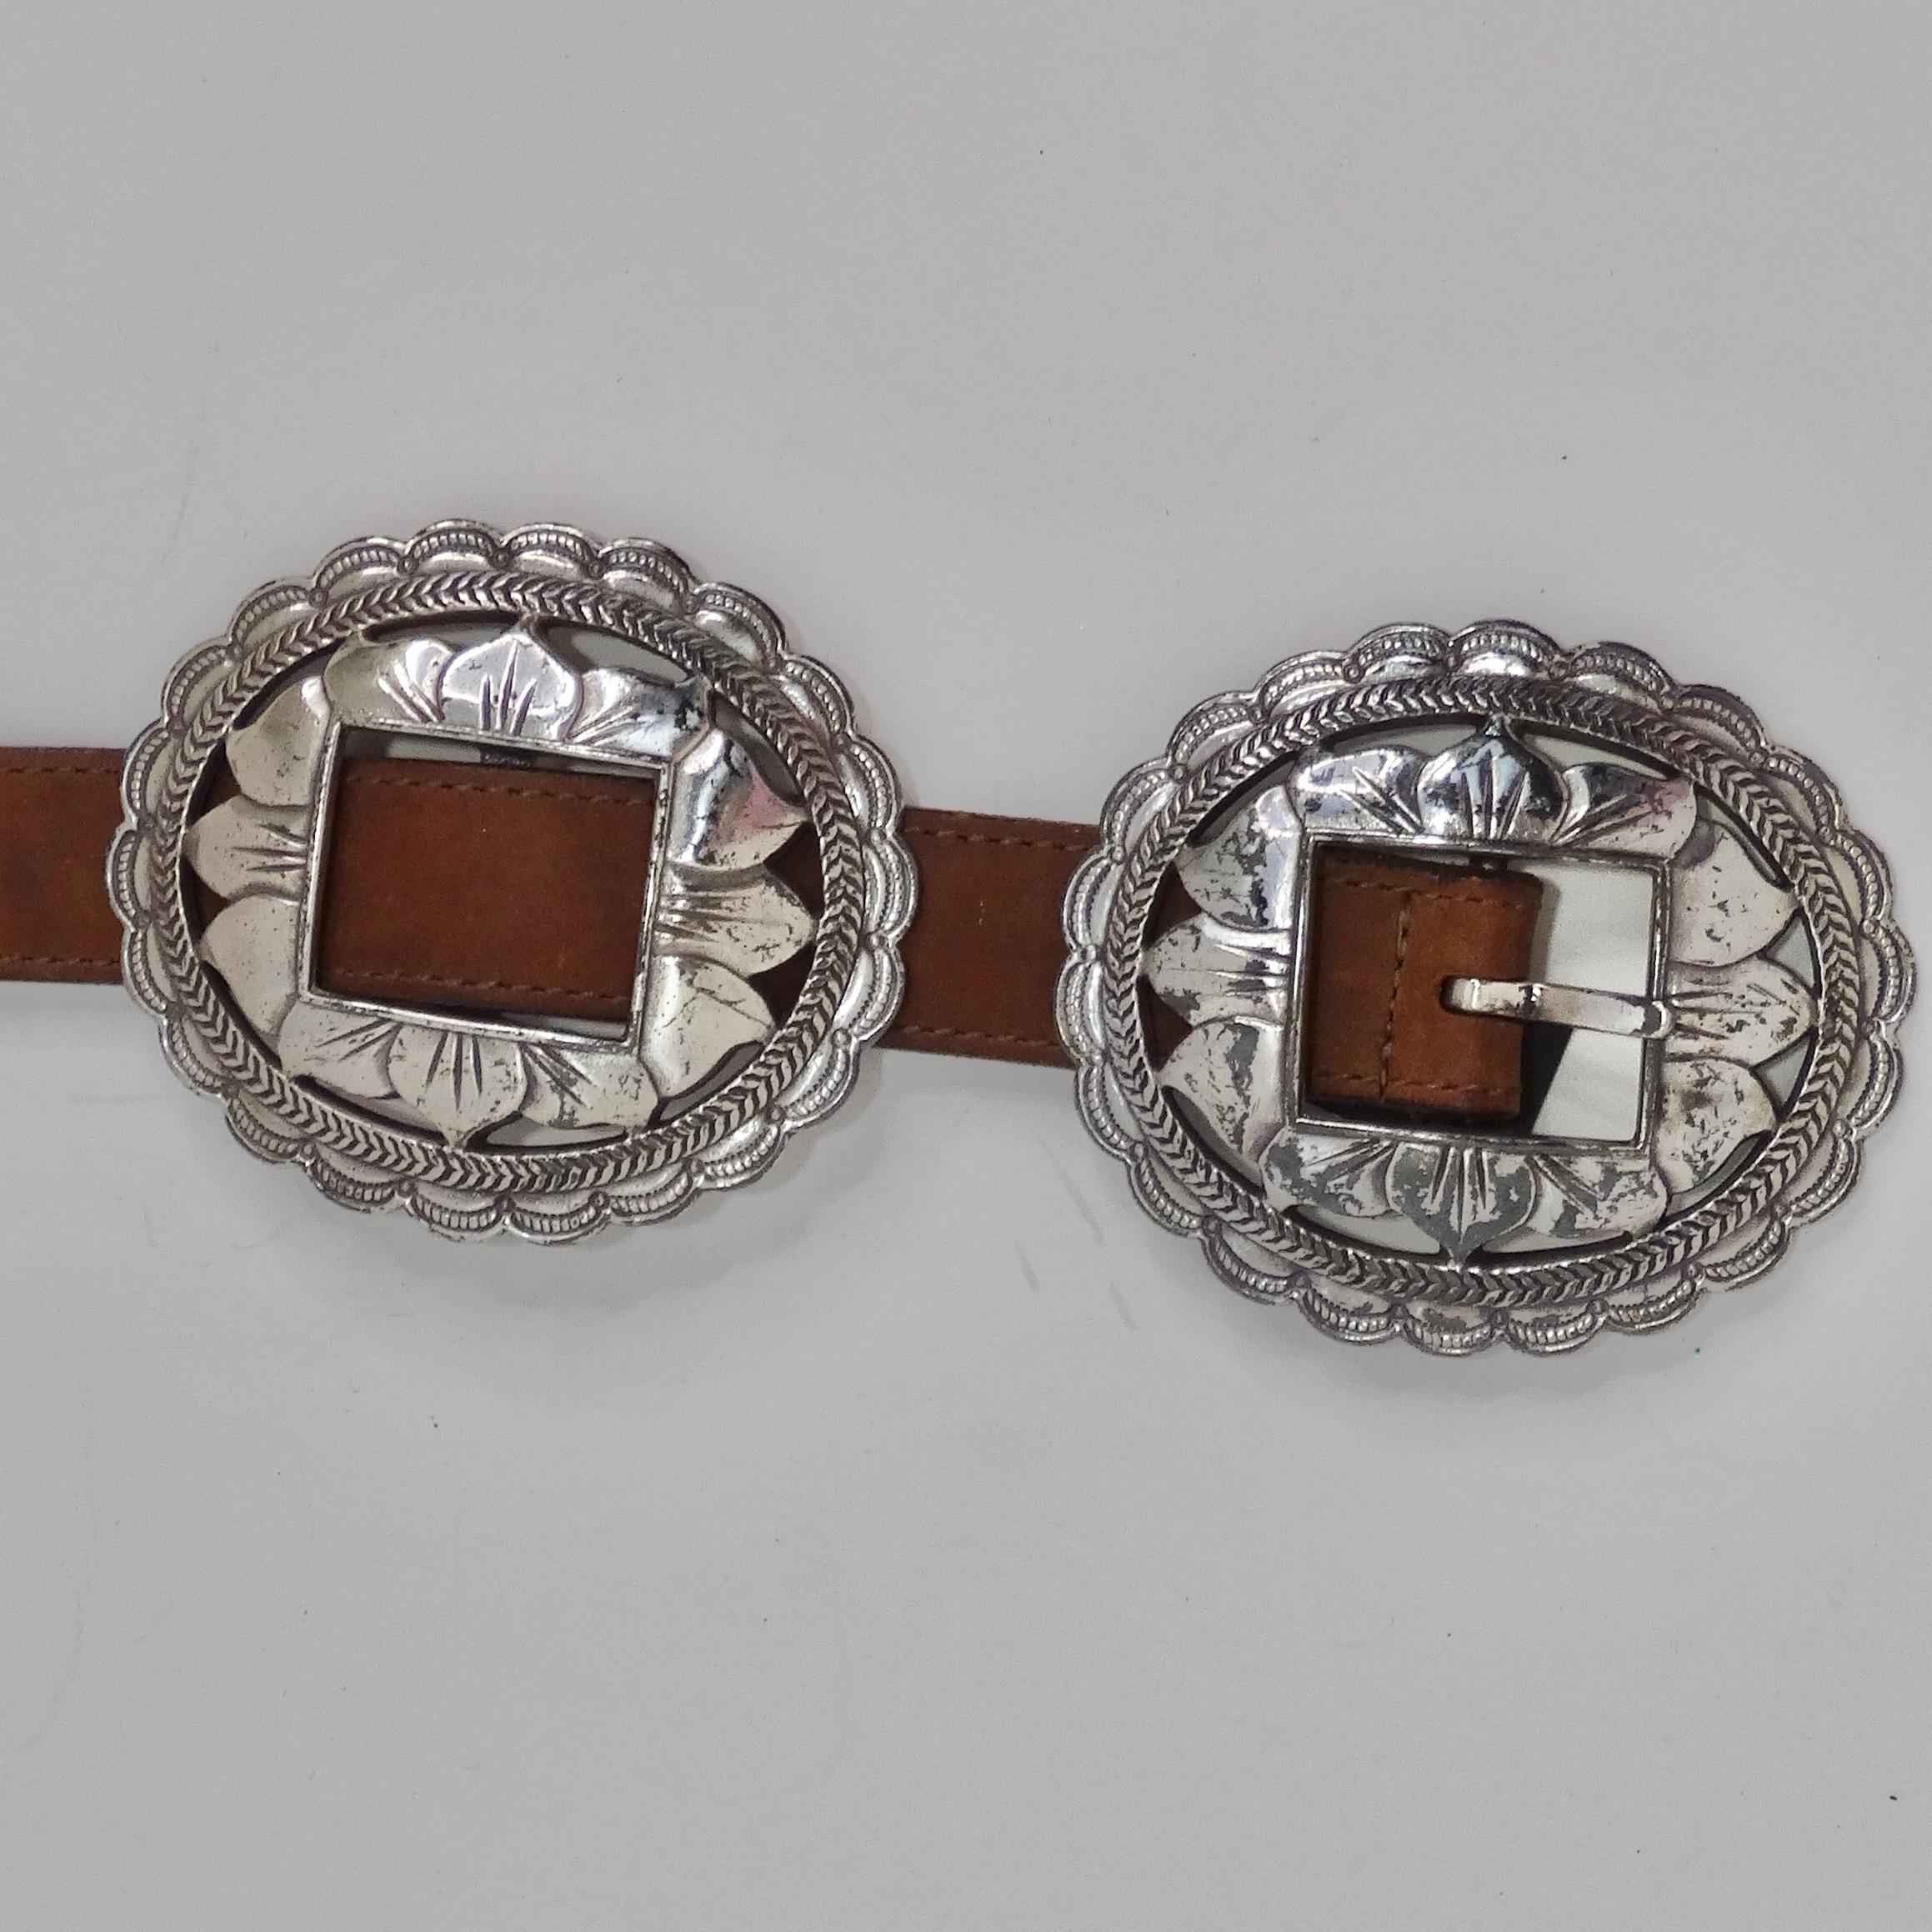 1990s Brown Leather Silver Tone Belt For Sale 5